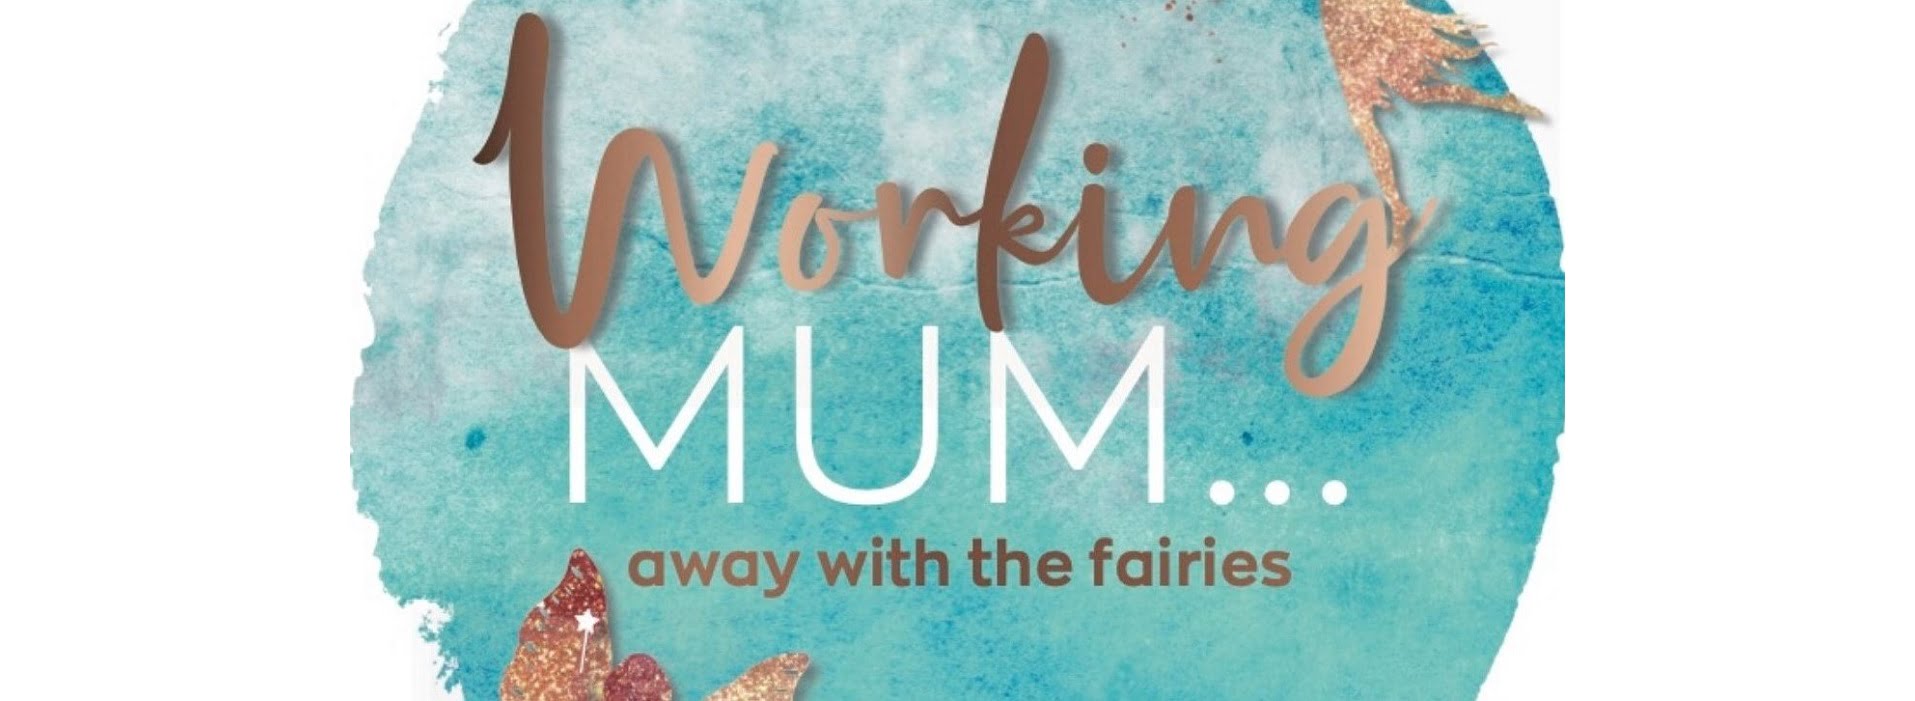 Working Mum...away with the fairies